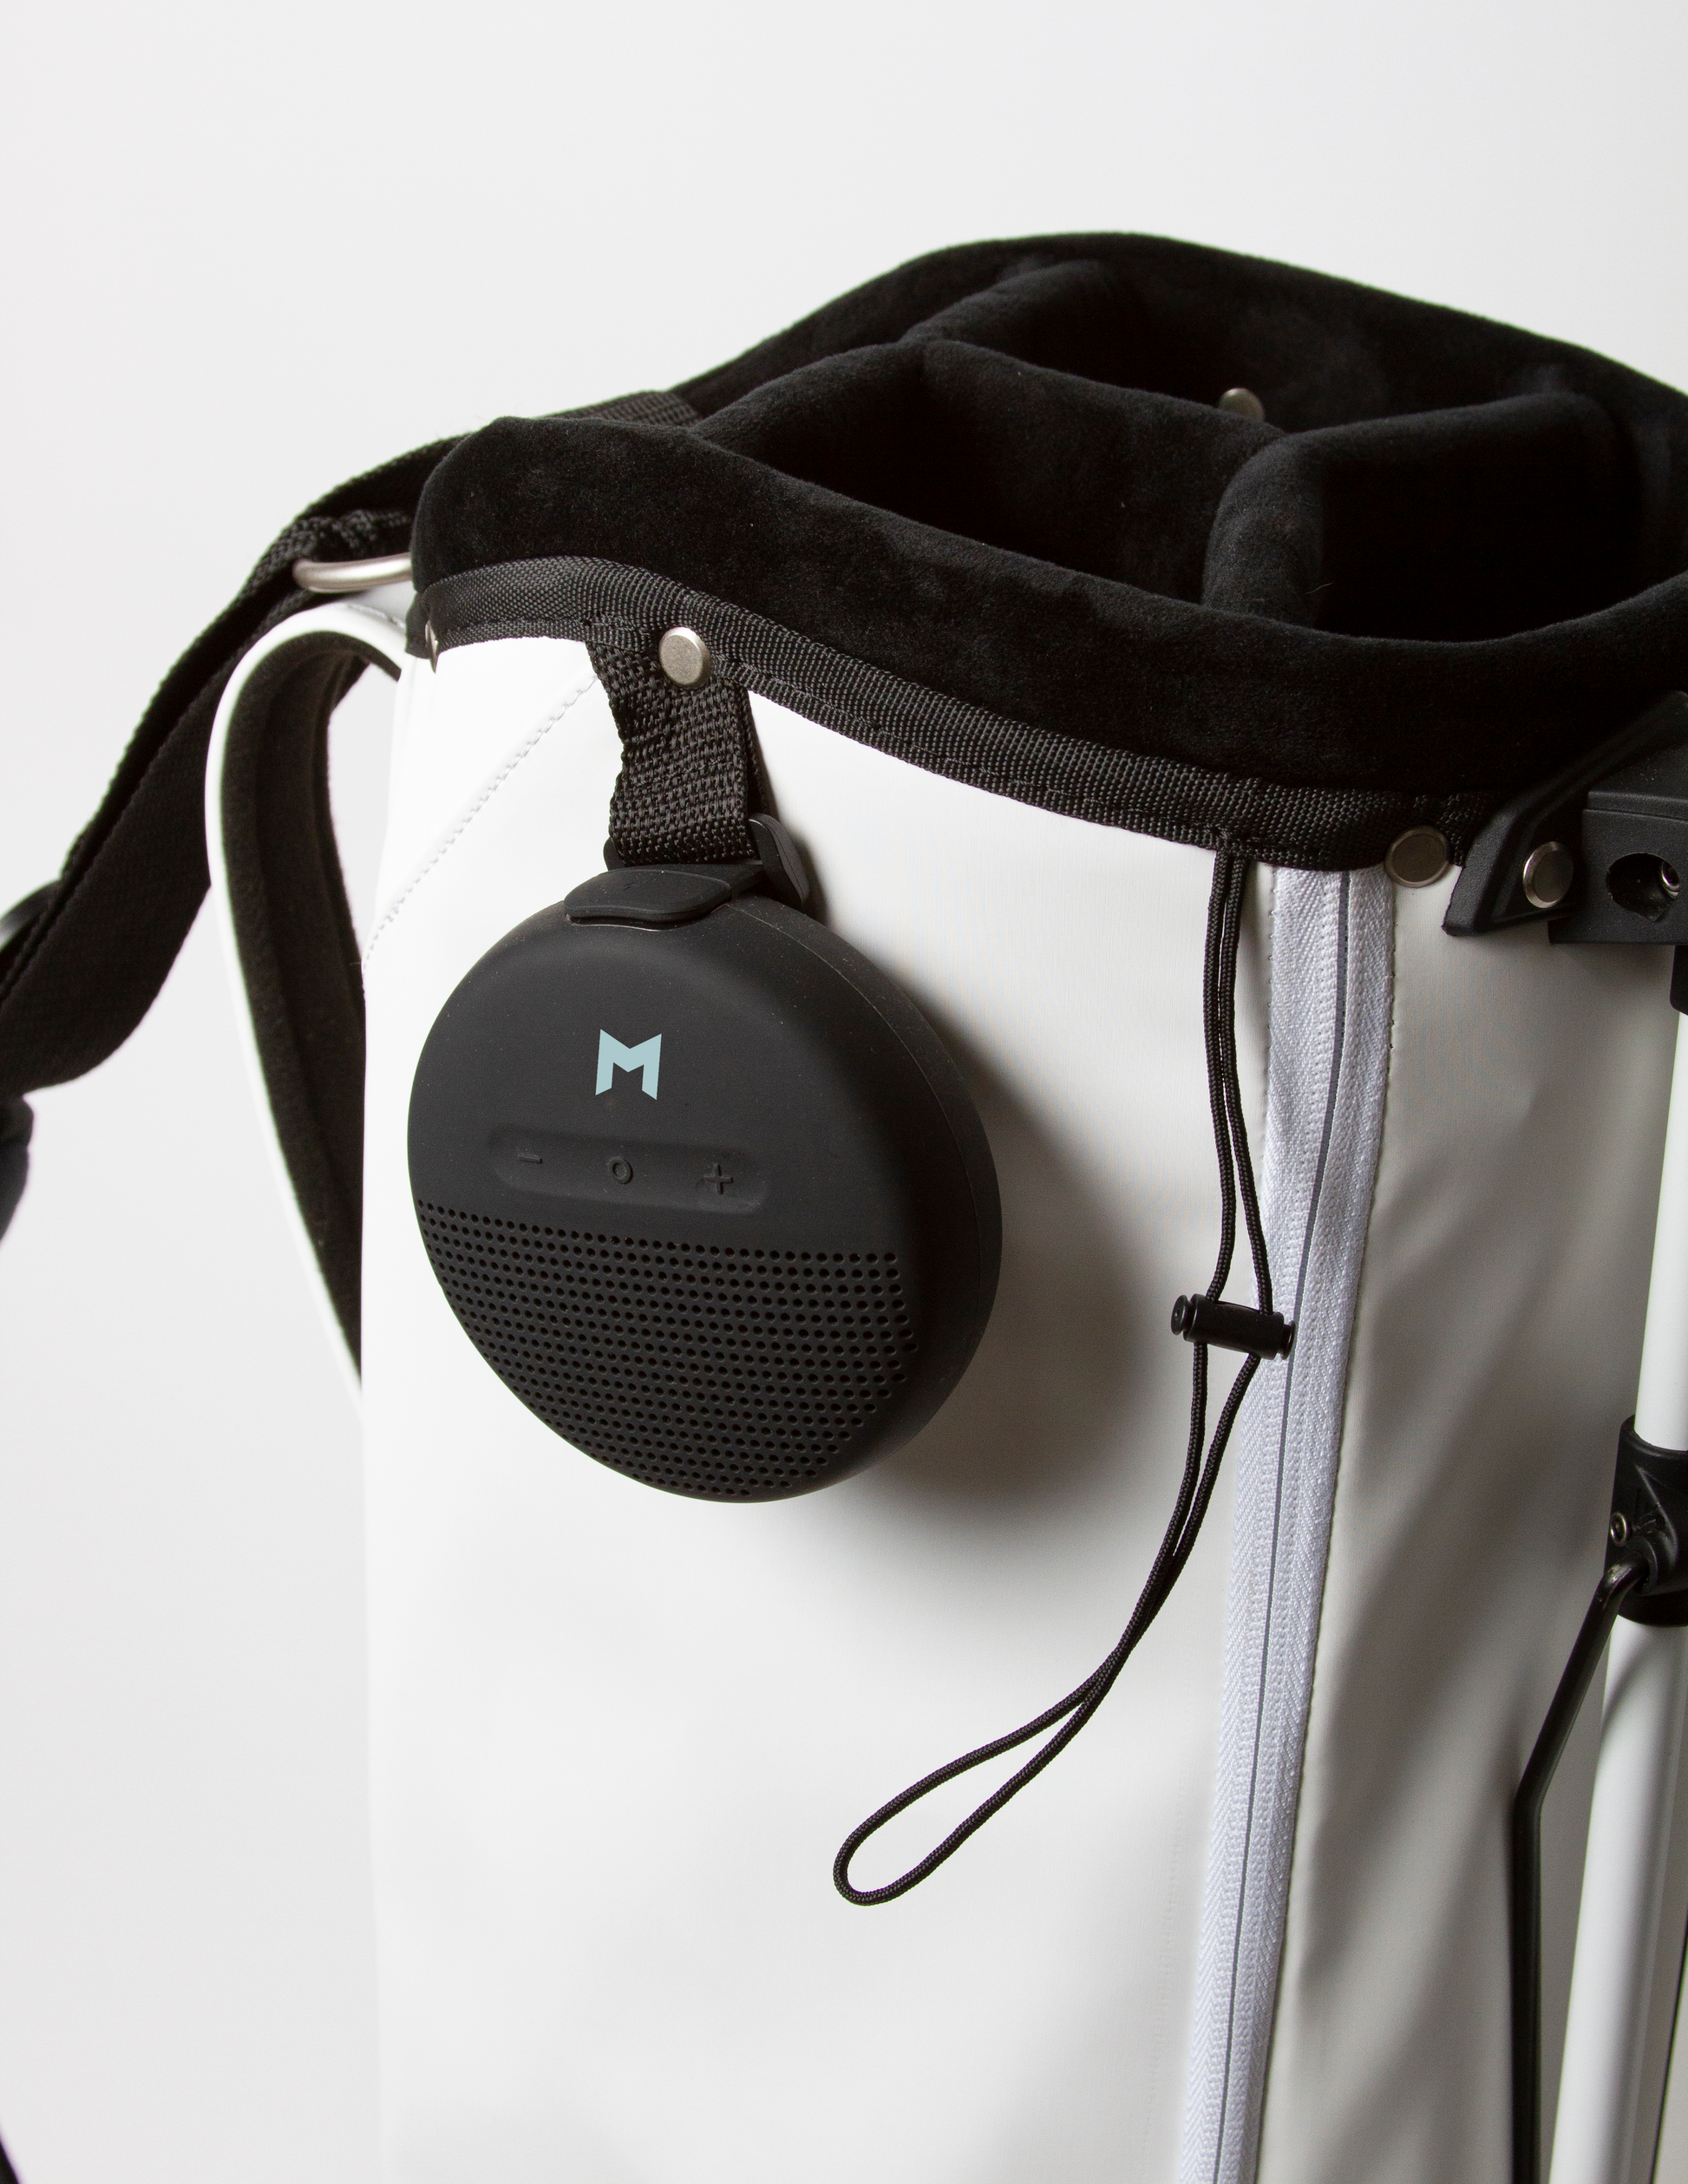 White MNML GOLF bag made from microsuede, featuring a waterproof bluetooth speaker.